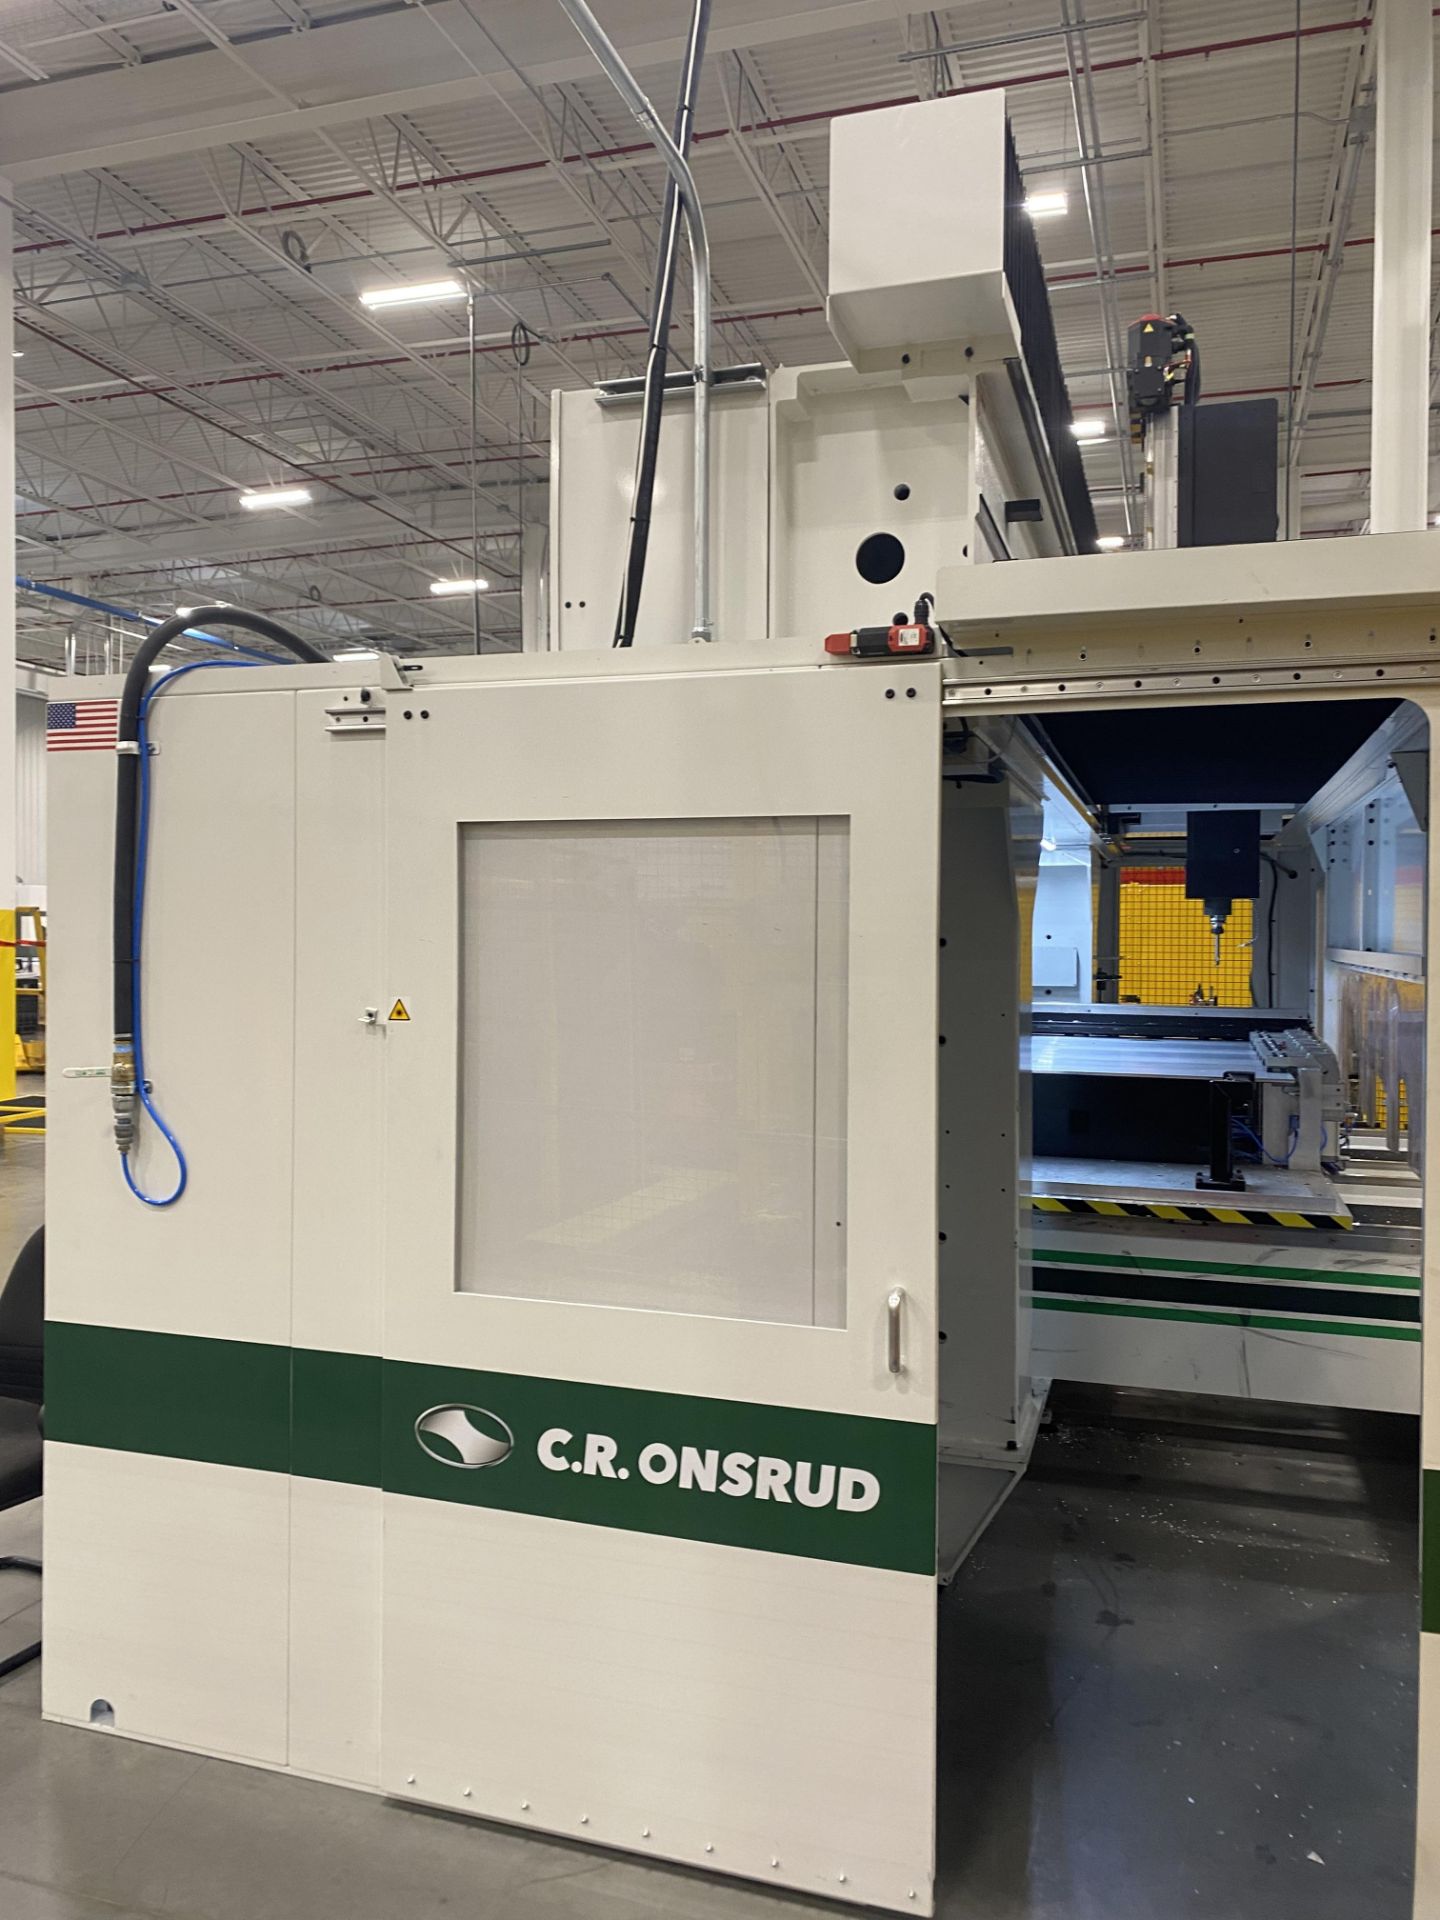 C.R ONSRUD MODEL 98E18 "Extreme Series" CNC ROUTER, 5 x 8 Table New 2023 - Image 3 of 12